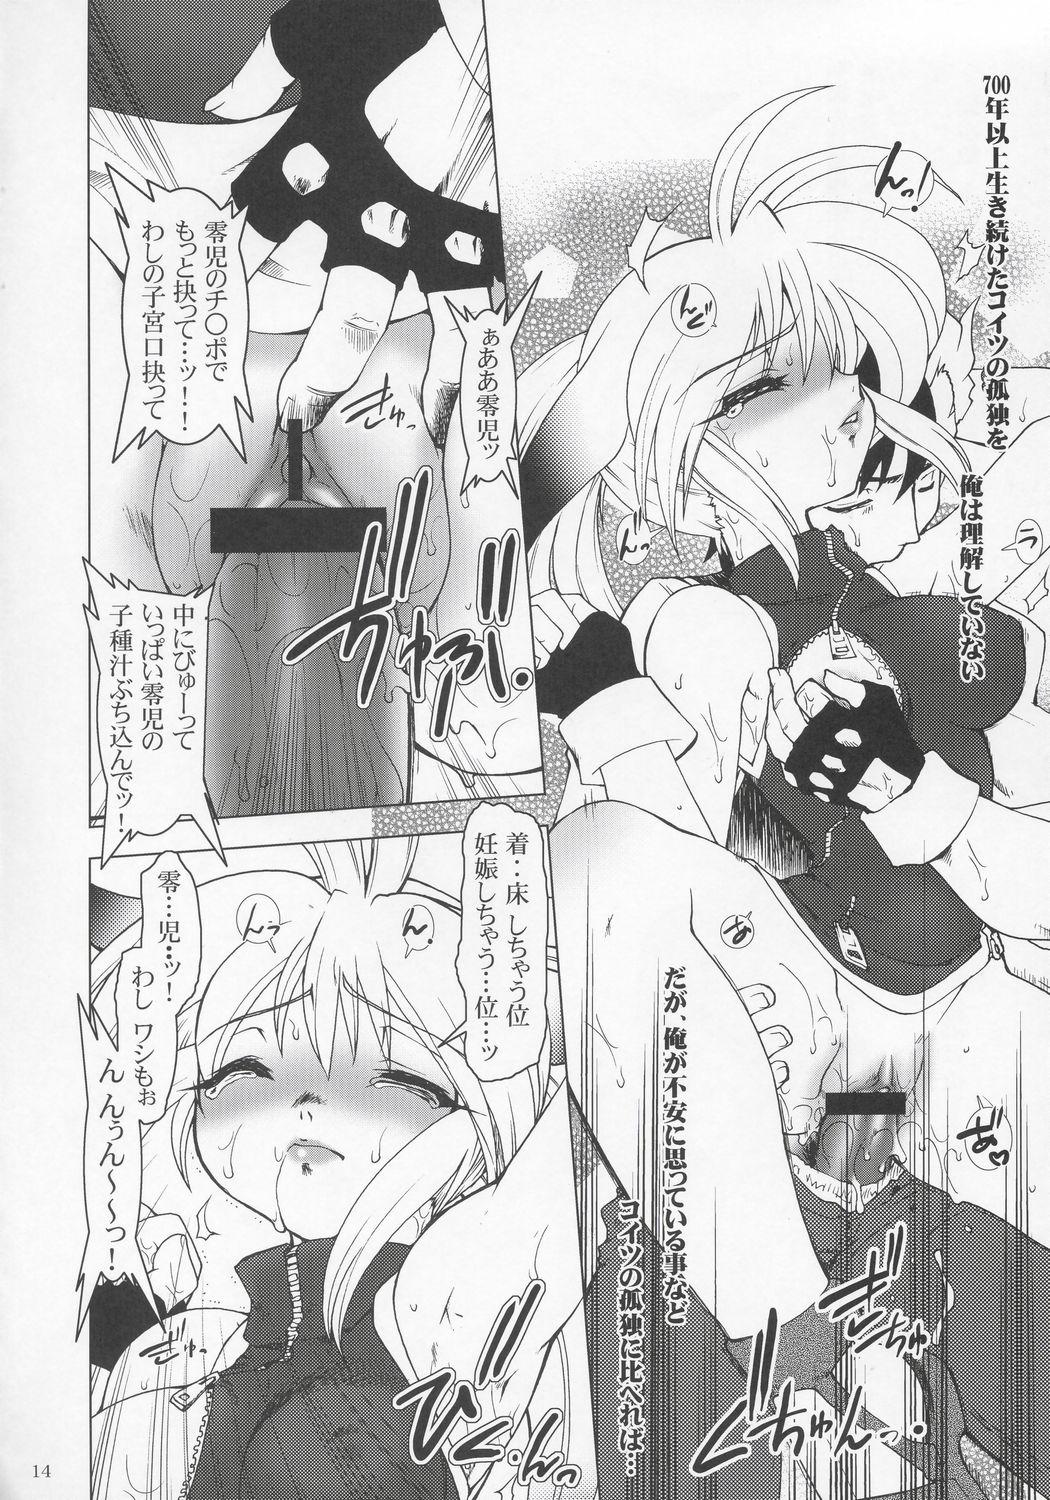 Butt NxC - Endless frontier Valkyrie no bouken Teenage Sex - Page 13